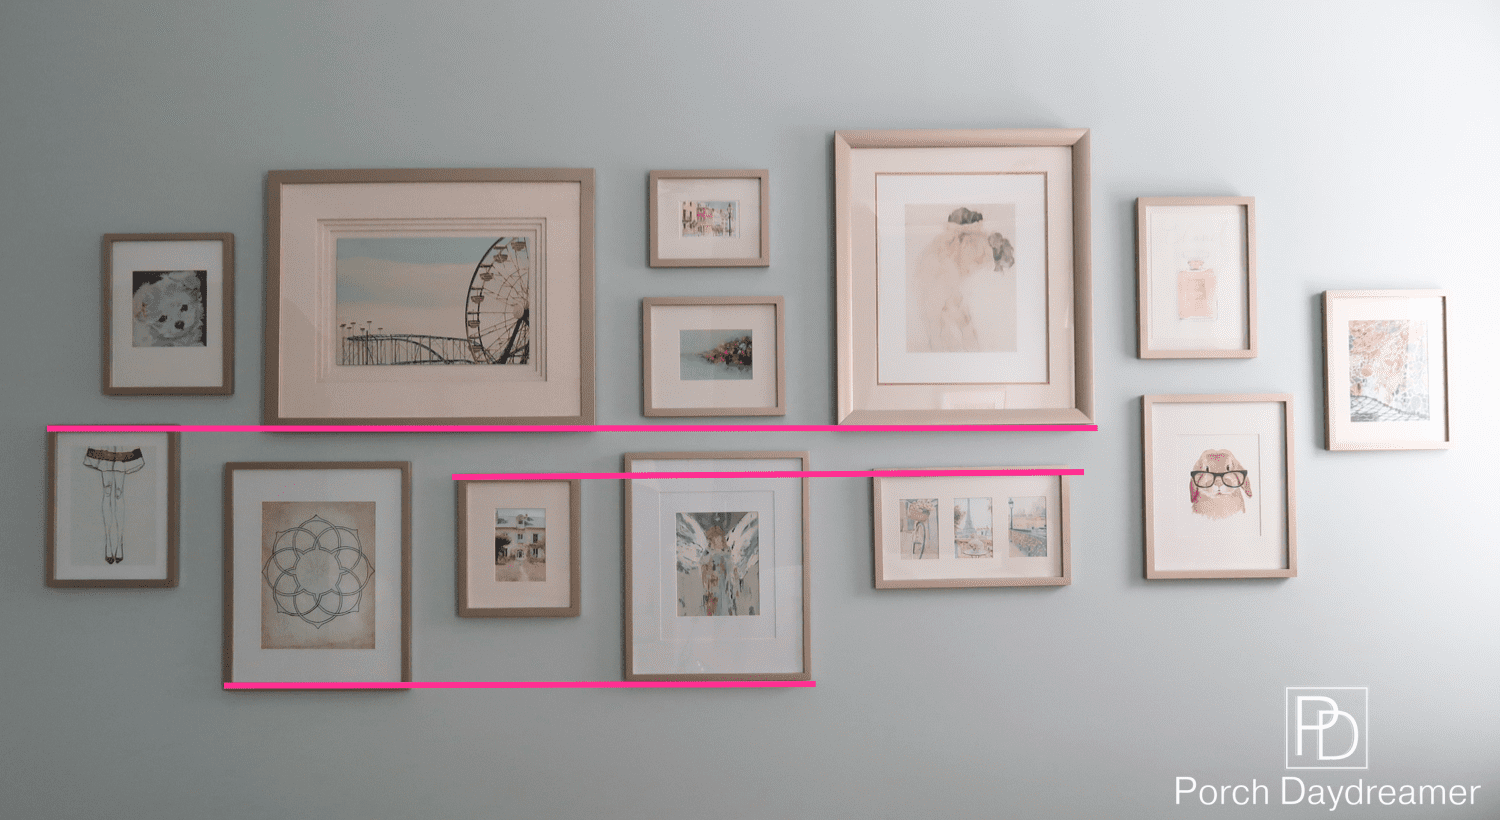 How to Hang an Art Gallery Wall